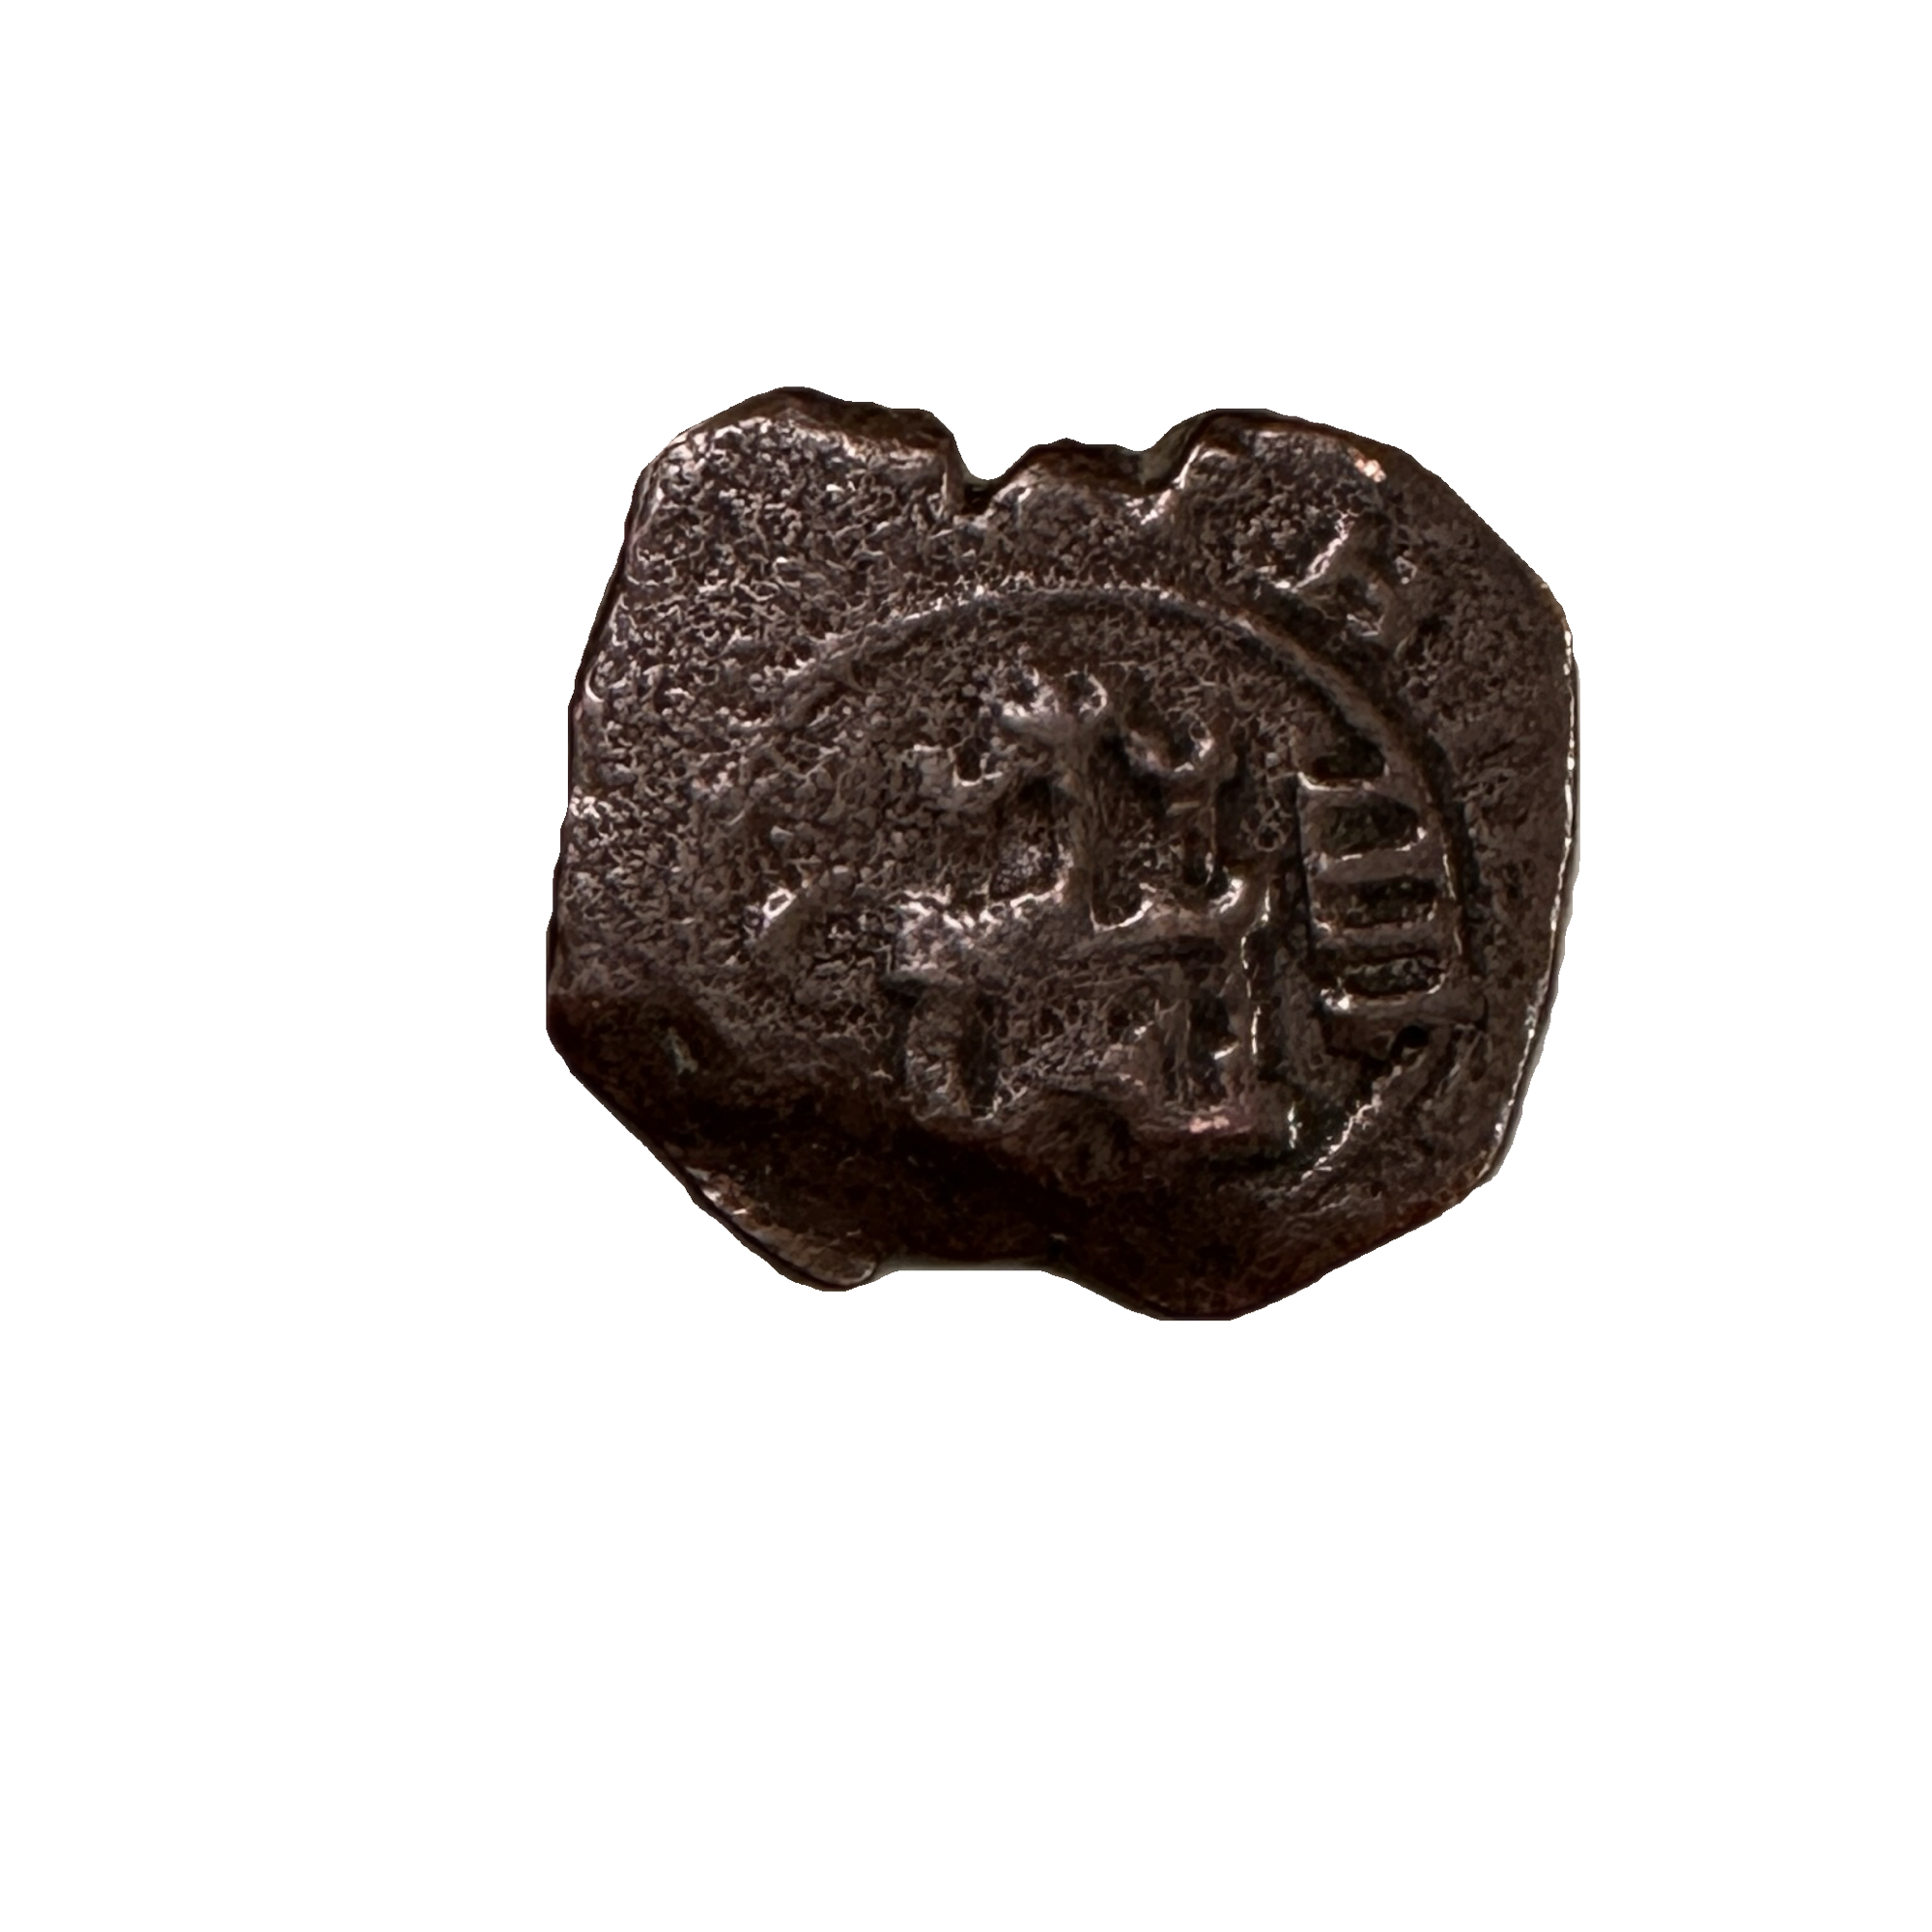 This Spanish pirate coin has an amazing shape due to the excessive pressure that was exerted on the copper to form the coin. The detail is truly exceptional.